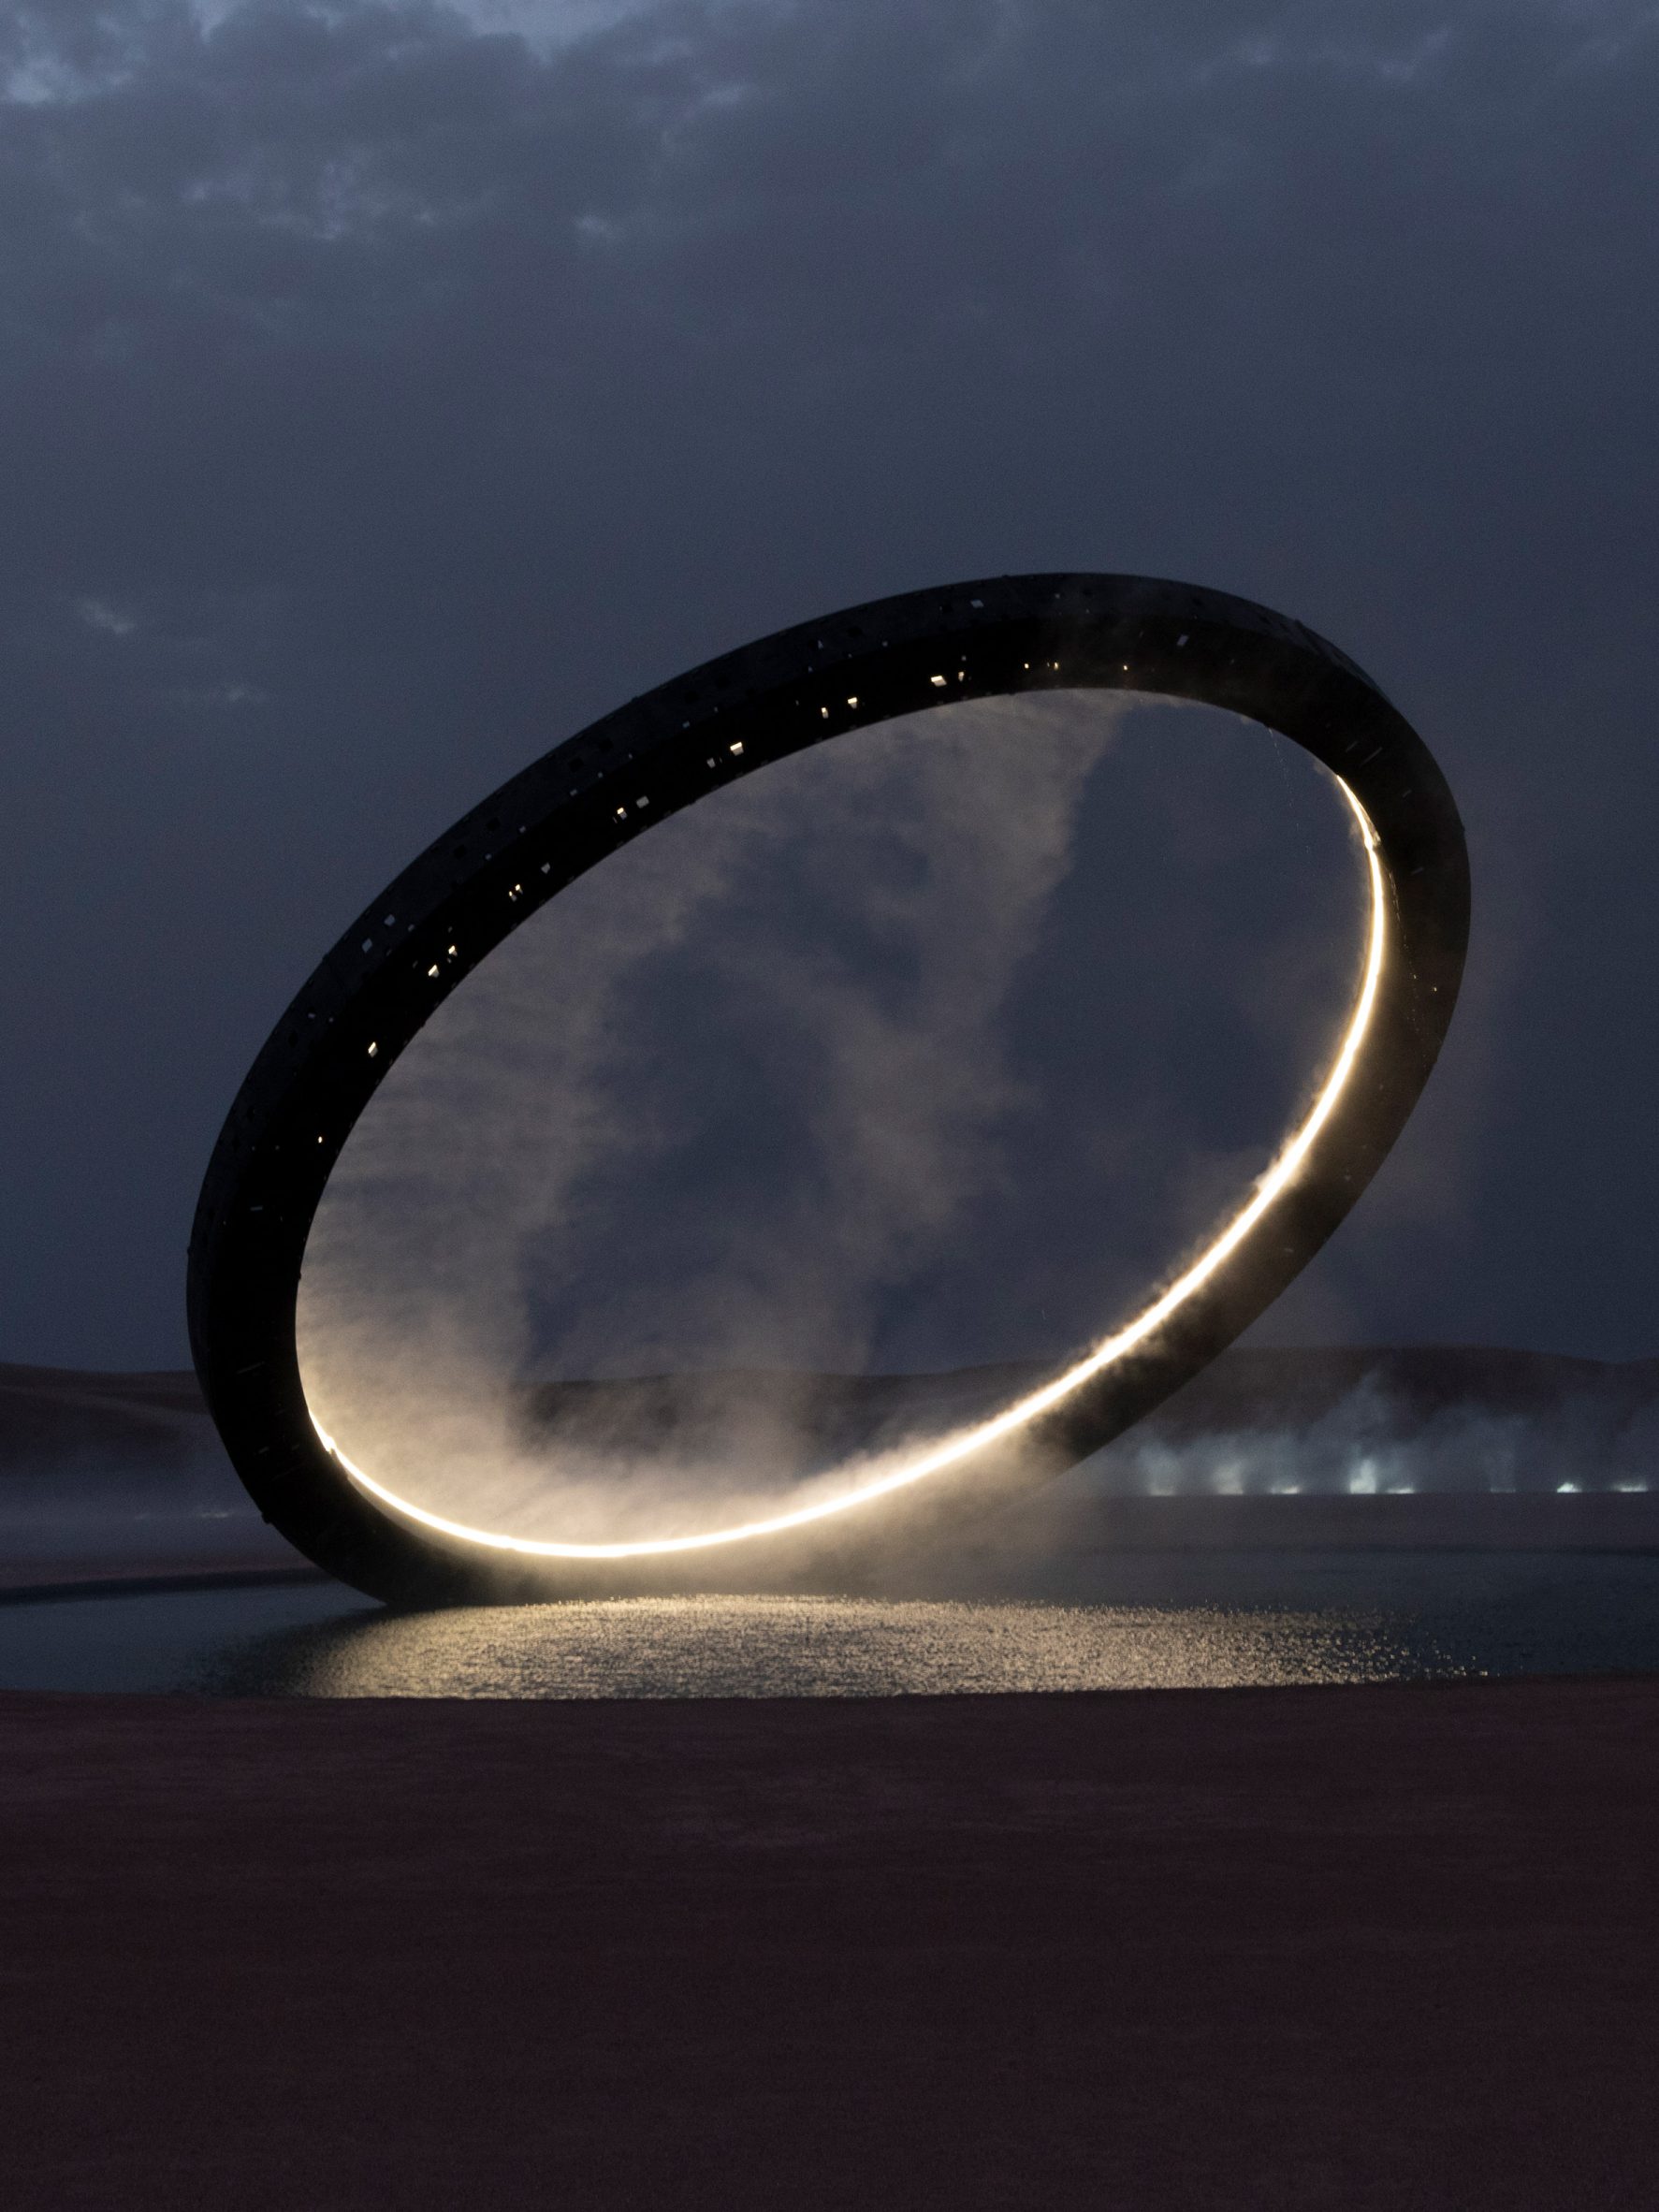 The illuminated ring by Es Devlin is pictured at glowing at night